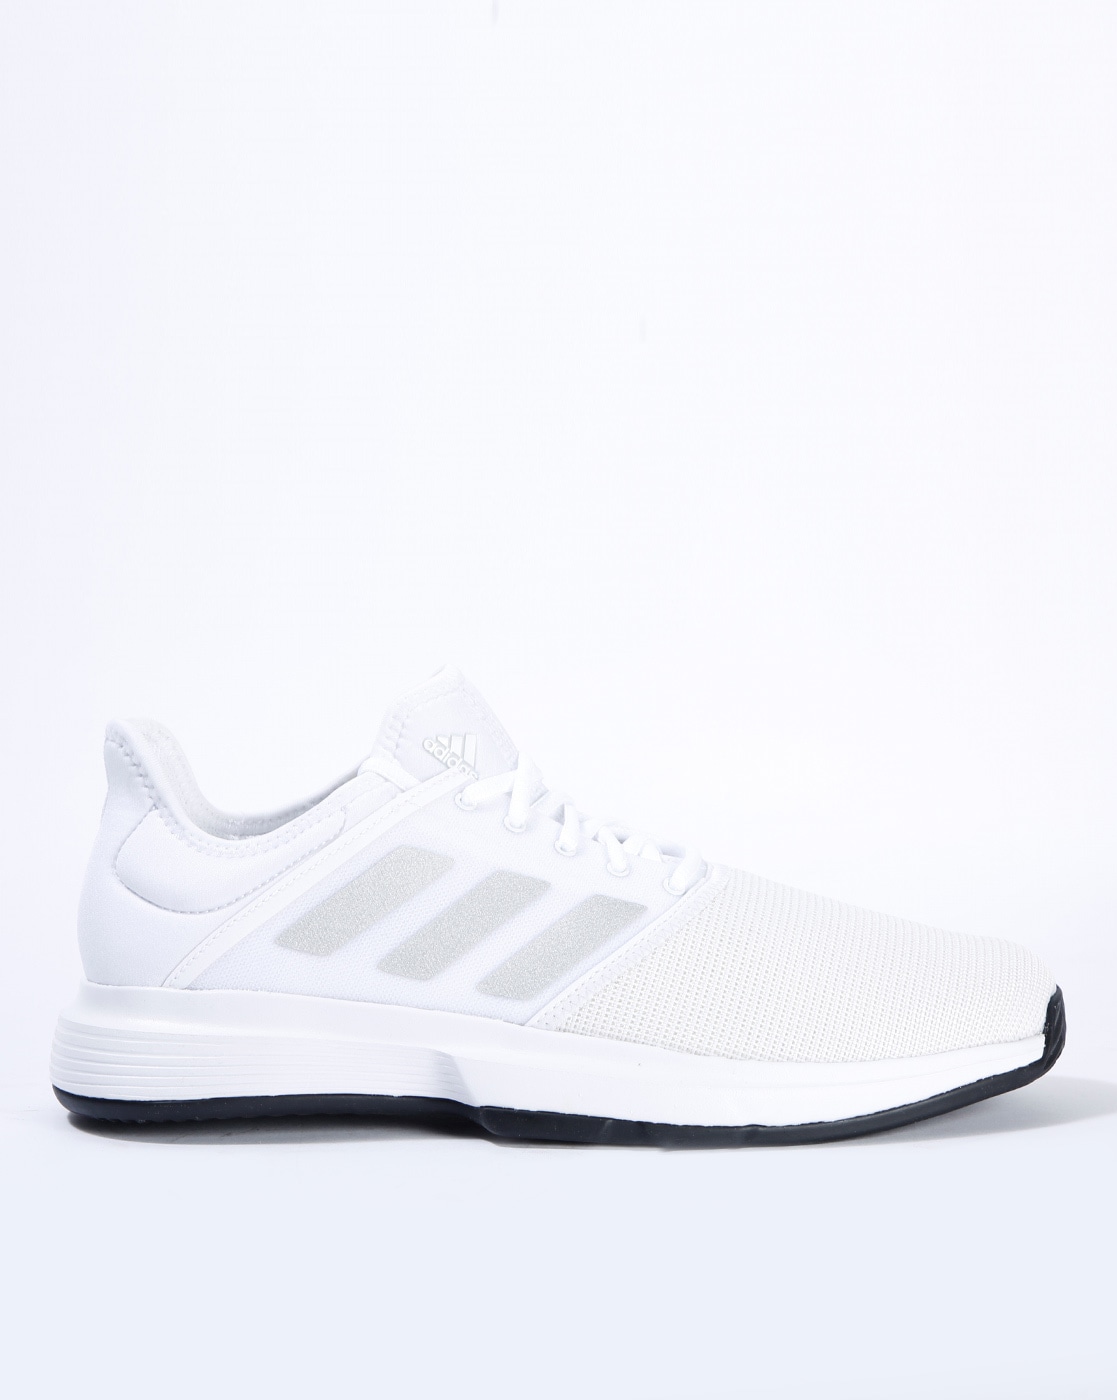 adidas sports shoes online shopping